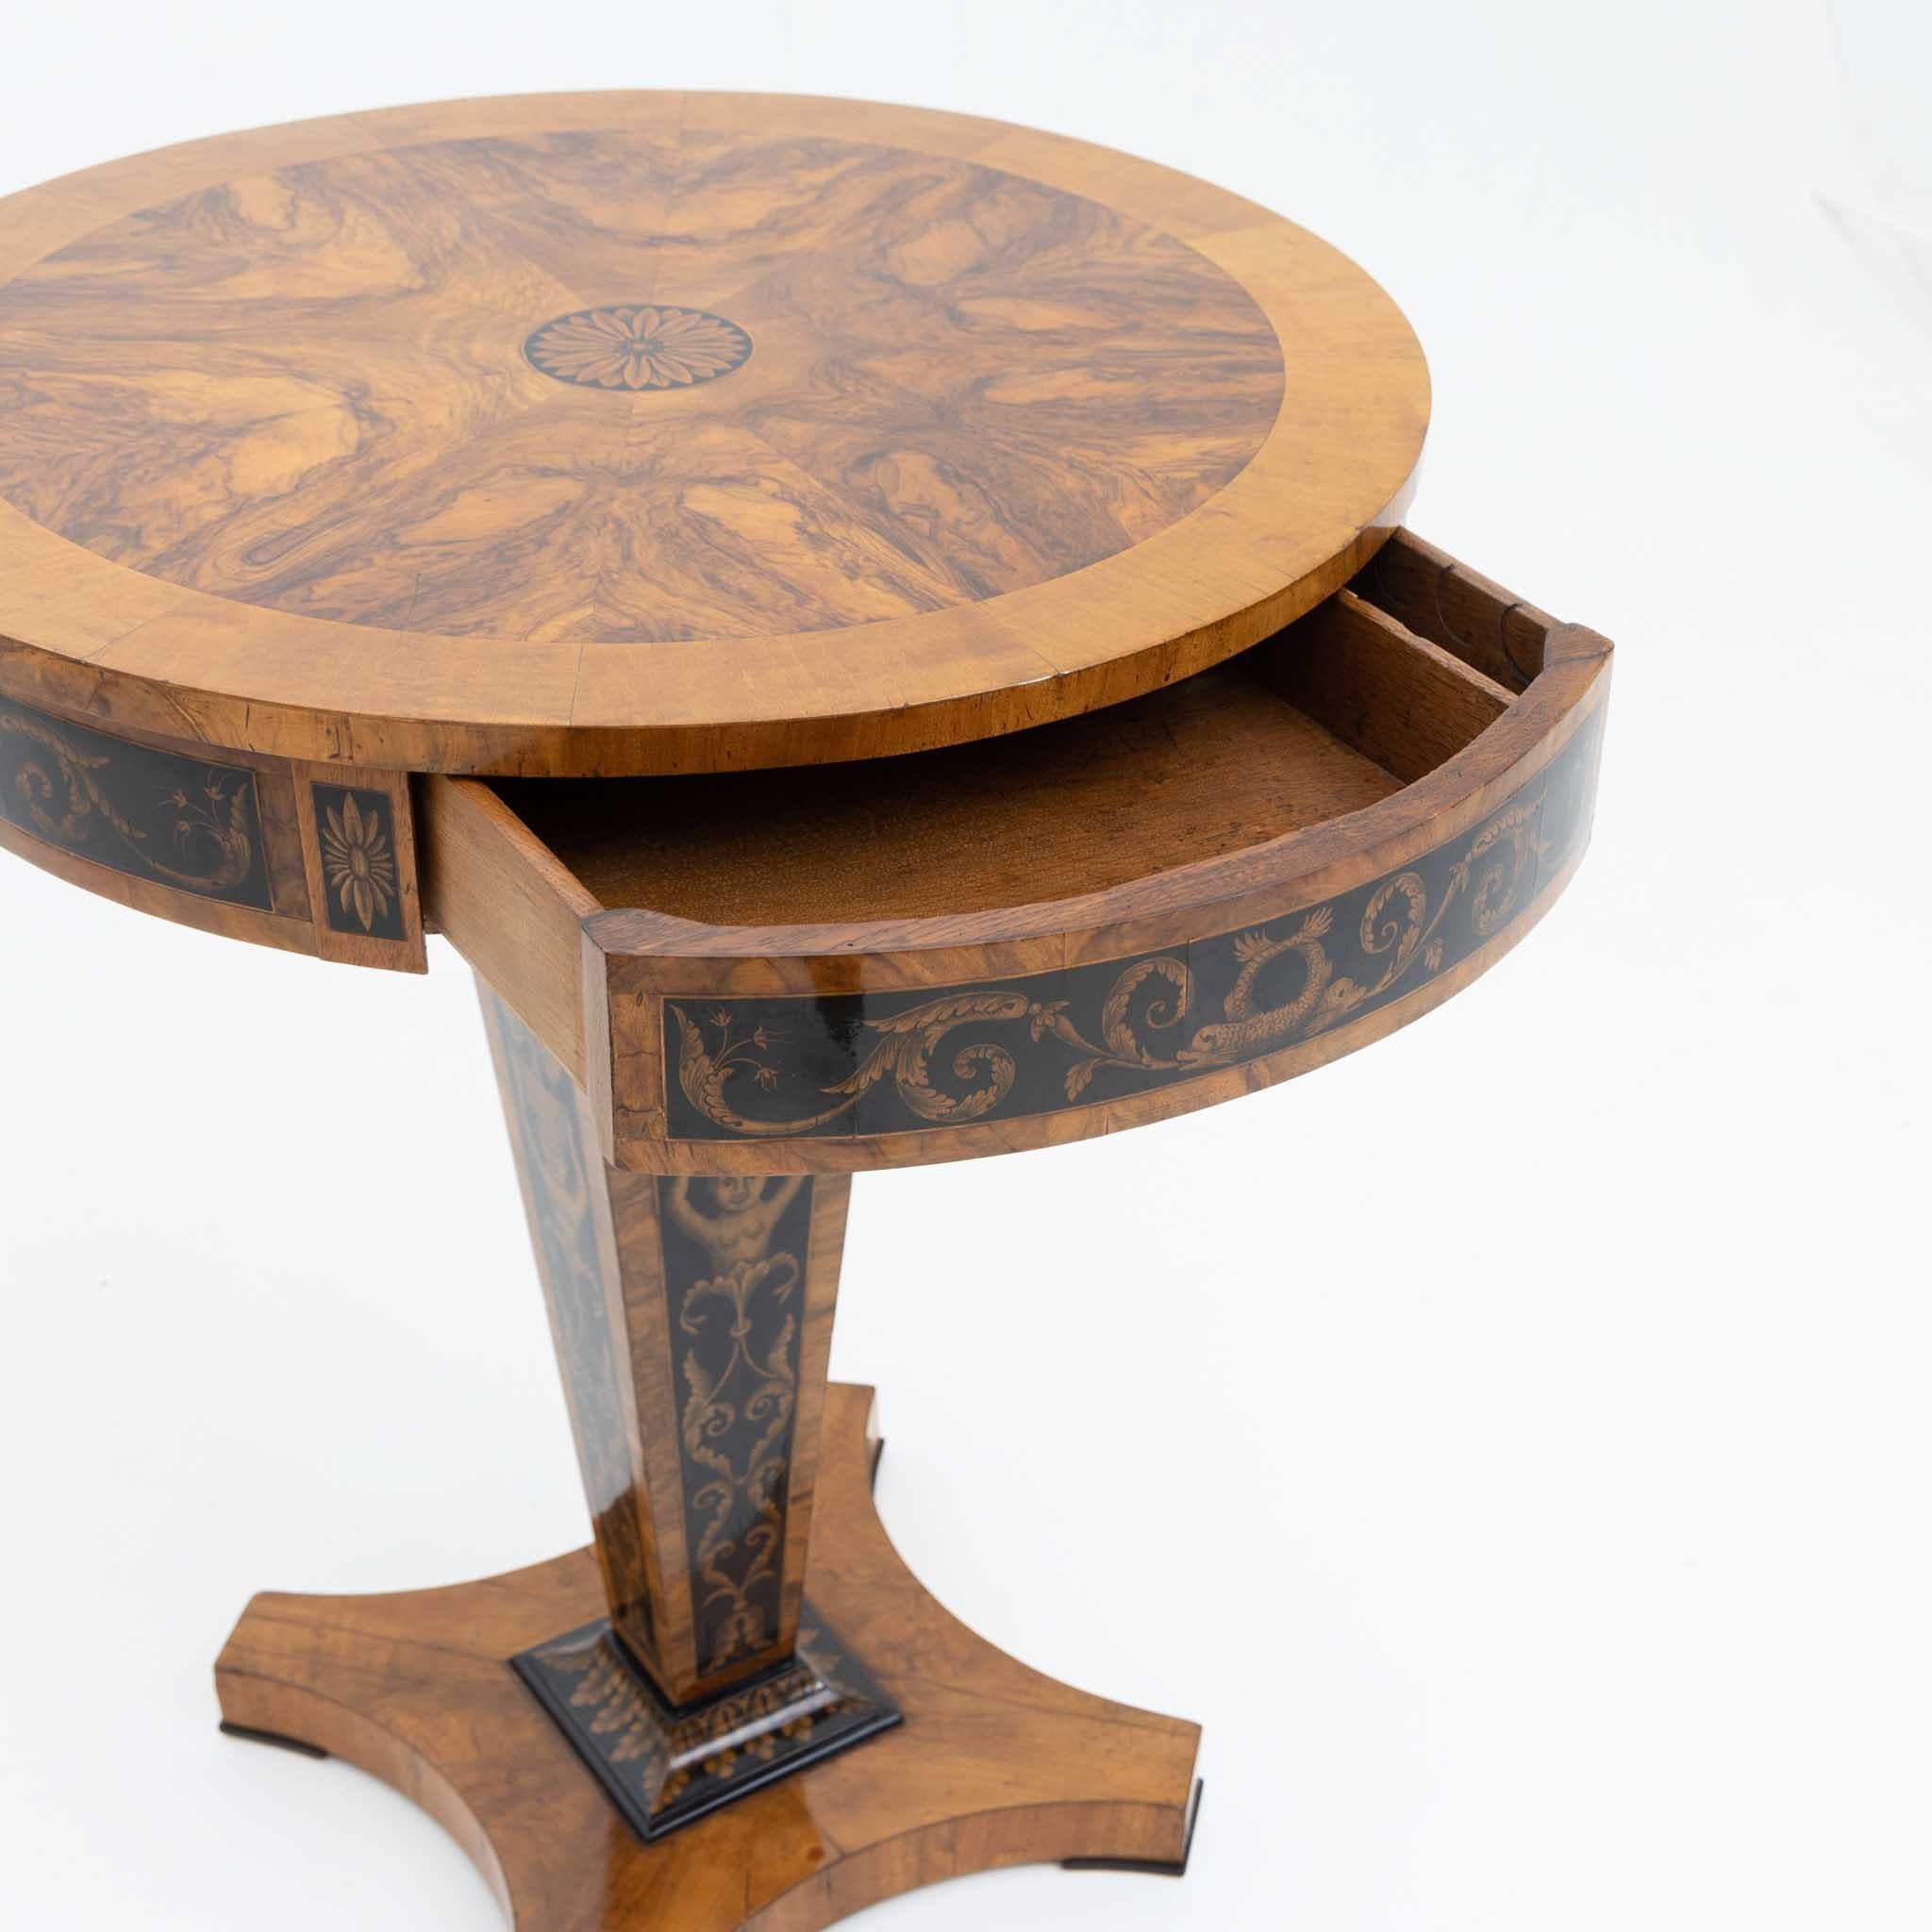 Walnut Empire Side Table with Black Ink Painting and a Drawer, Early 19th Century